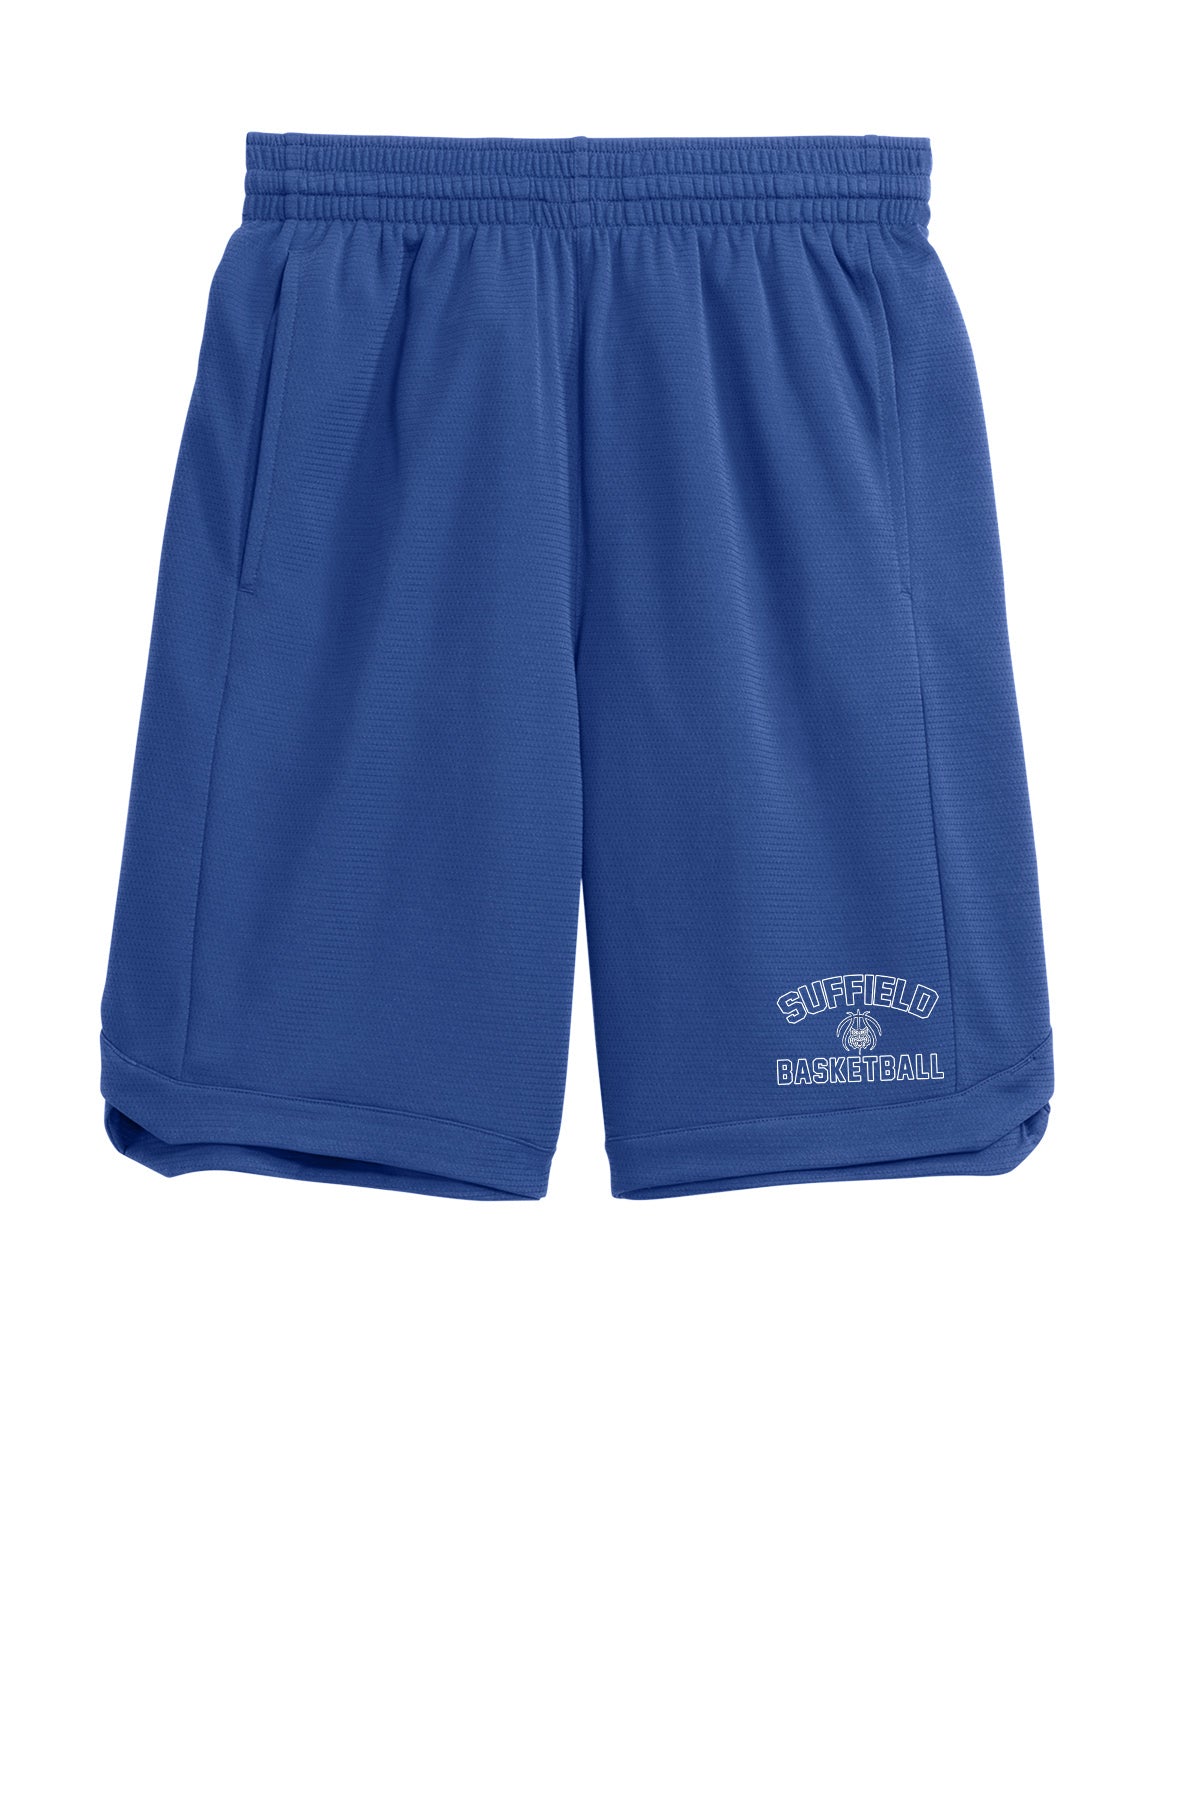 Suffield TB - Adult Basketball 9 inch Shorts - ST575 (color options available)